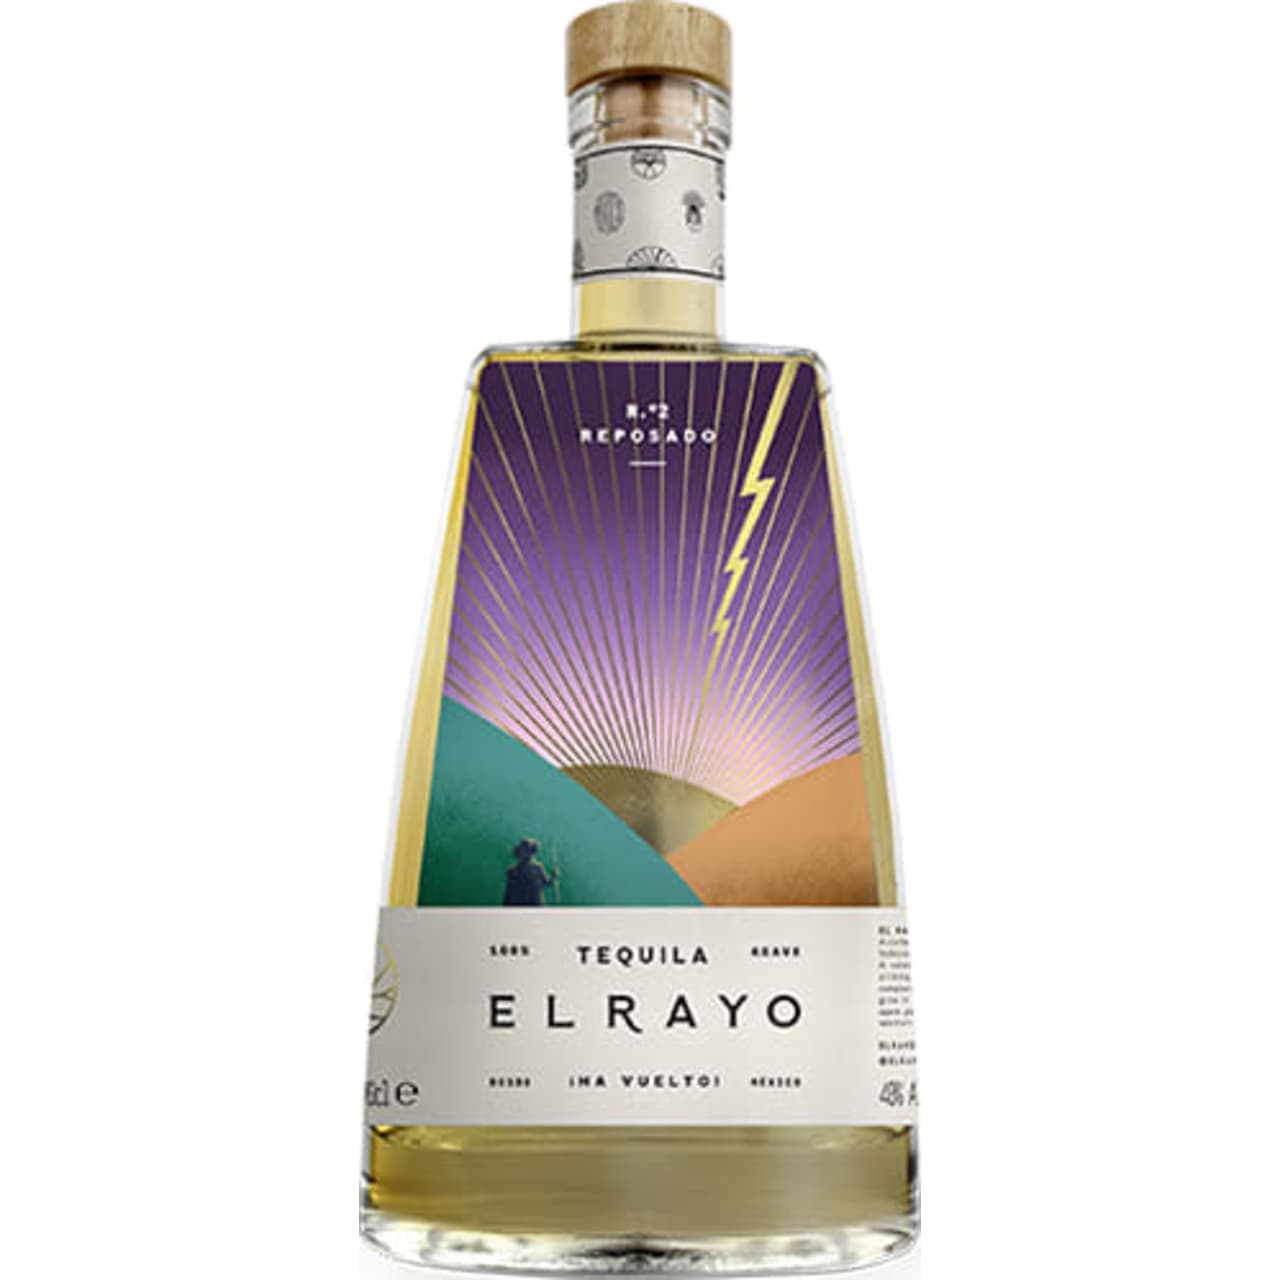 El Rayo Reposado is a full bodied and layered tequila made from 100% blue agave. Rested in ex-whisky casks for 7 months, it has a golden caramel colour and a rich, nutty complexity.